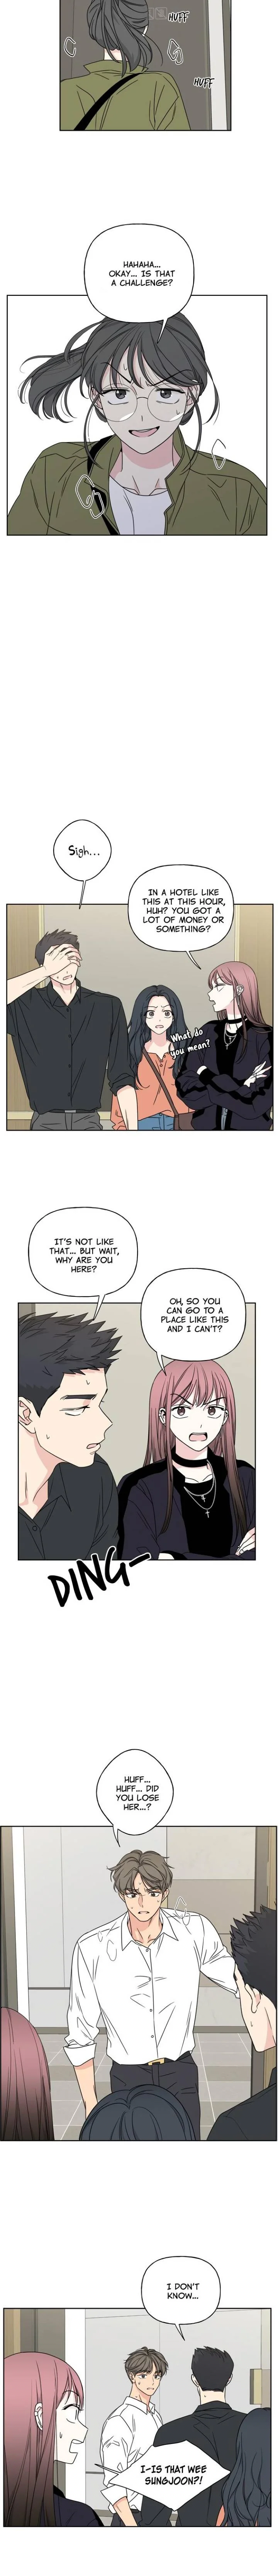 mother-im-sorry-chap-24-6